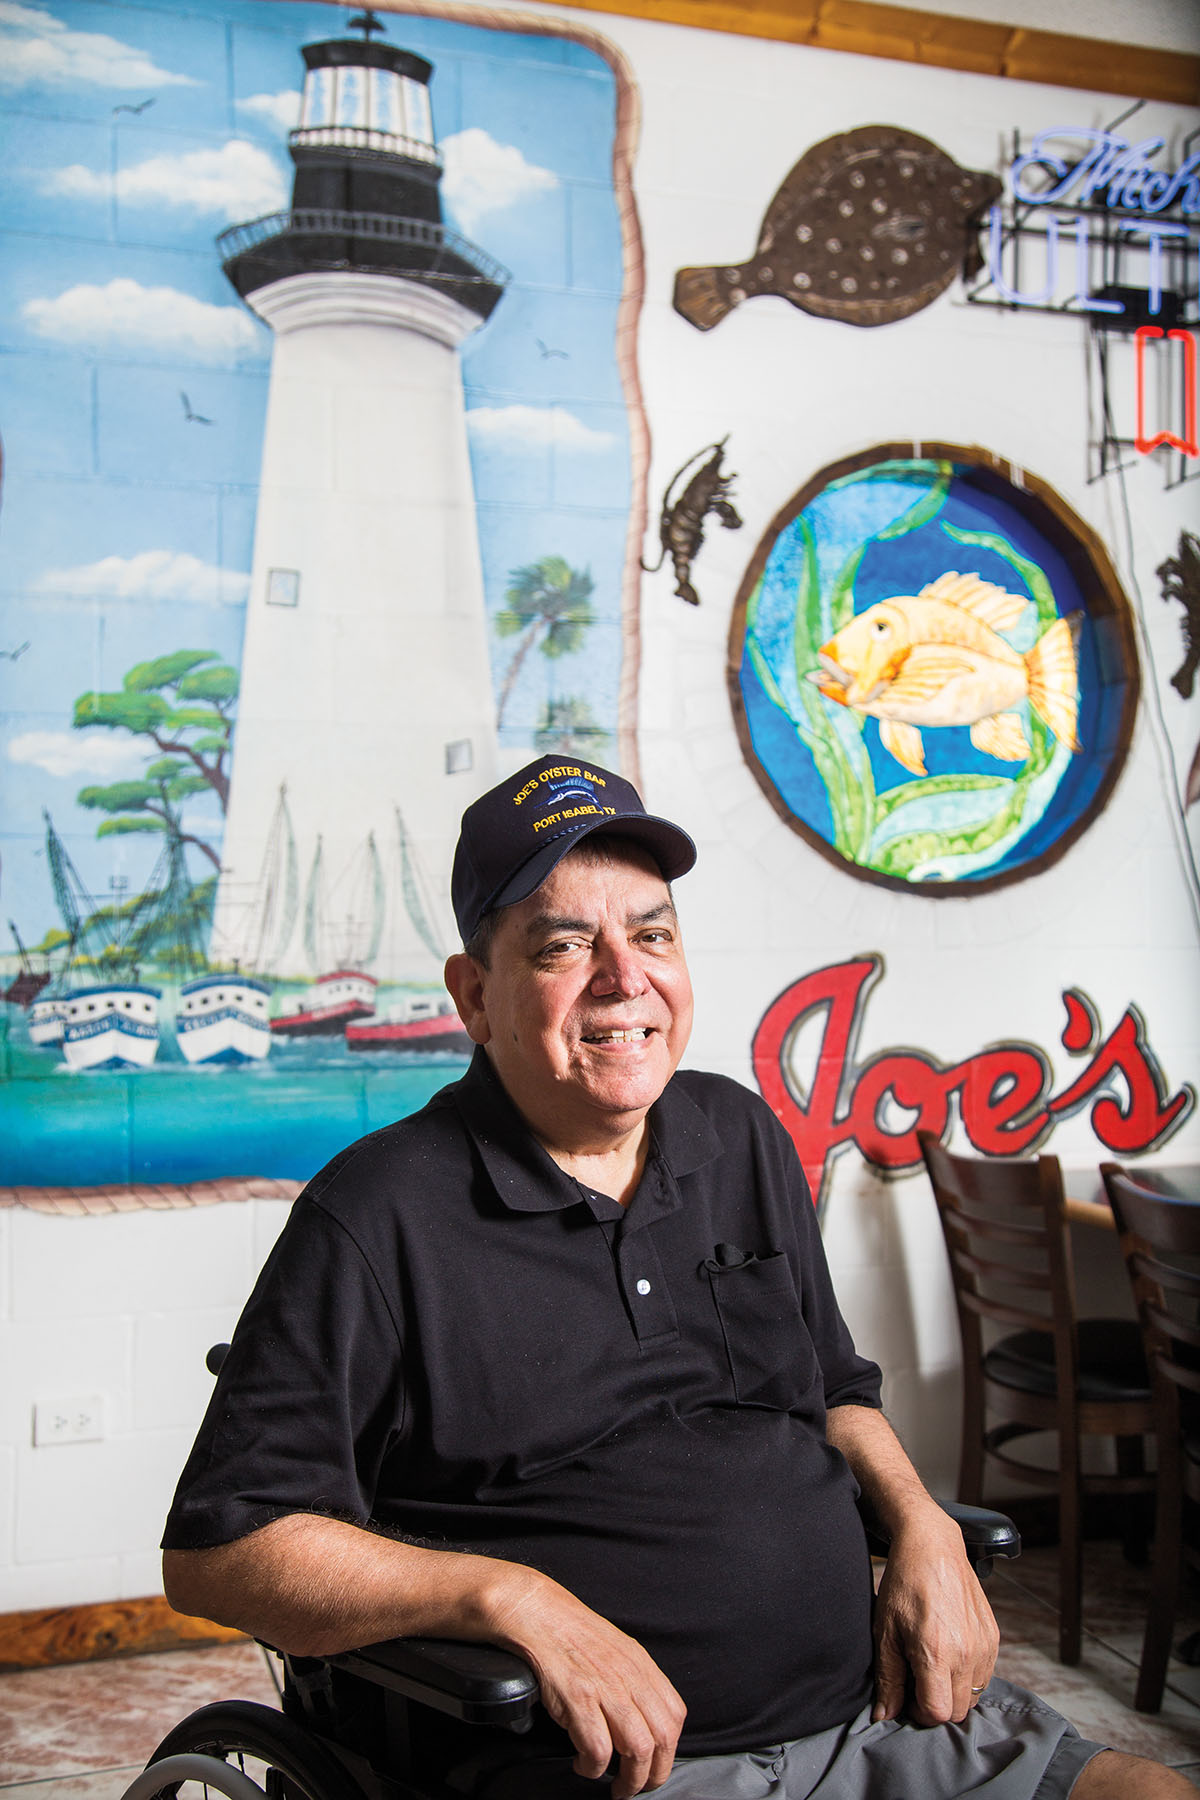 A man in a black shirt and ball cap sits in front of a mural painted lighthouse